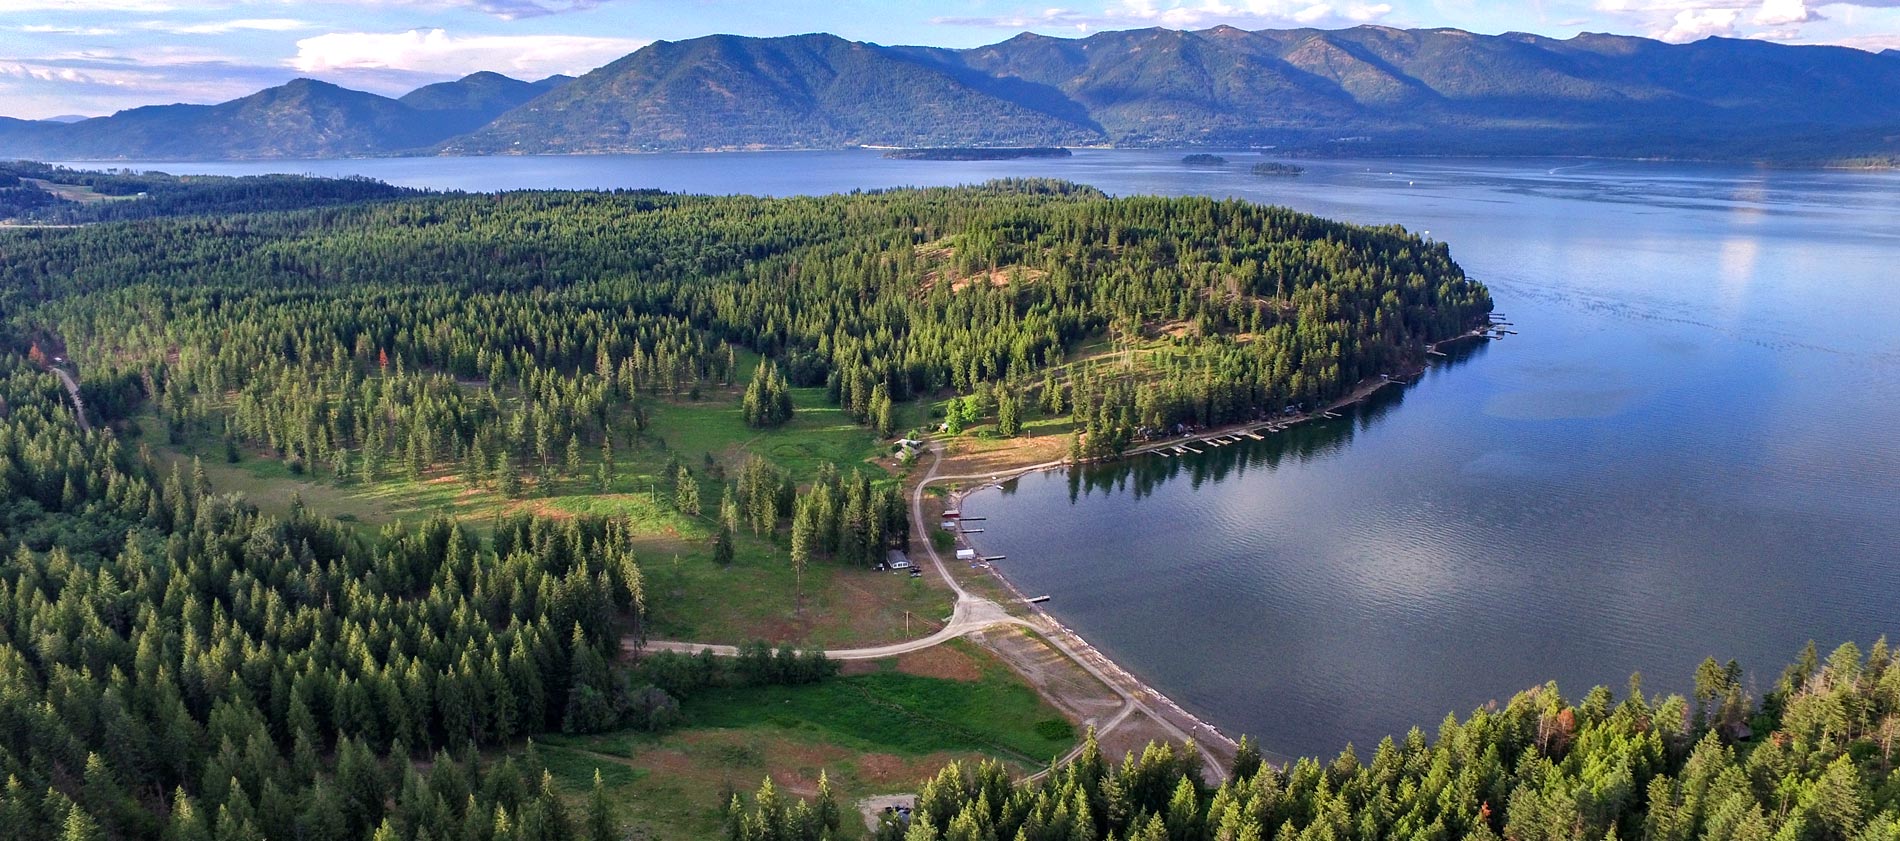 Camp Bay Estate 407 Acres and over 3000 feet of waterfront on Lake Pend Oreille